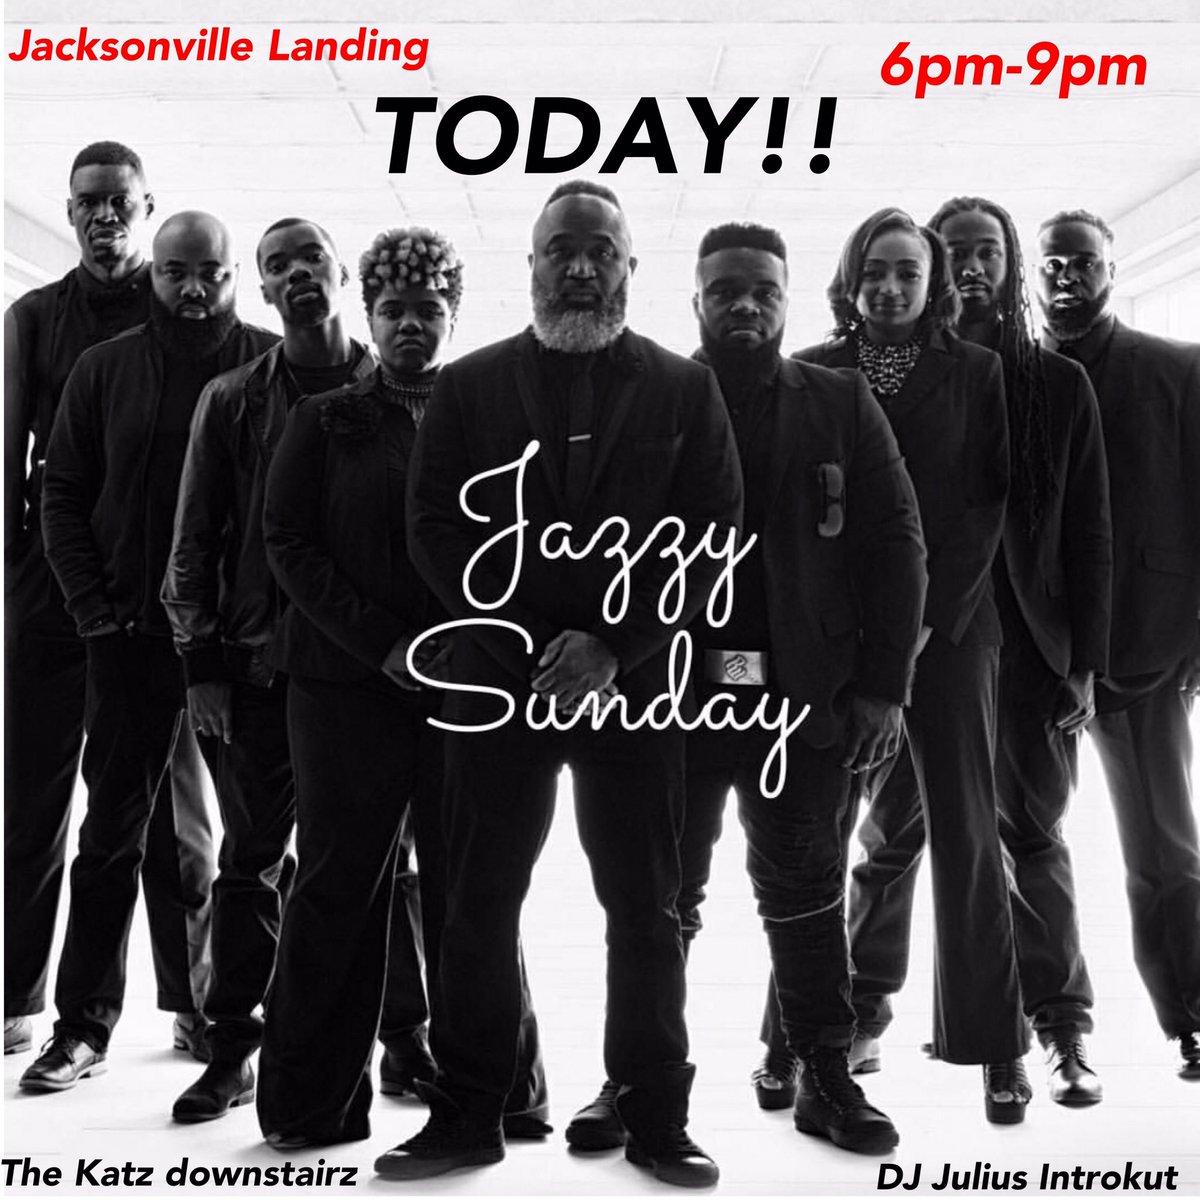 Still have family in town and looking for something to do? Well, bring them all out to the @JaxLanding , 6pm-9pm. Free.99! We'll see you there! #Katzville